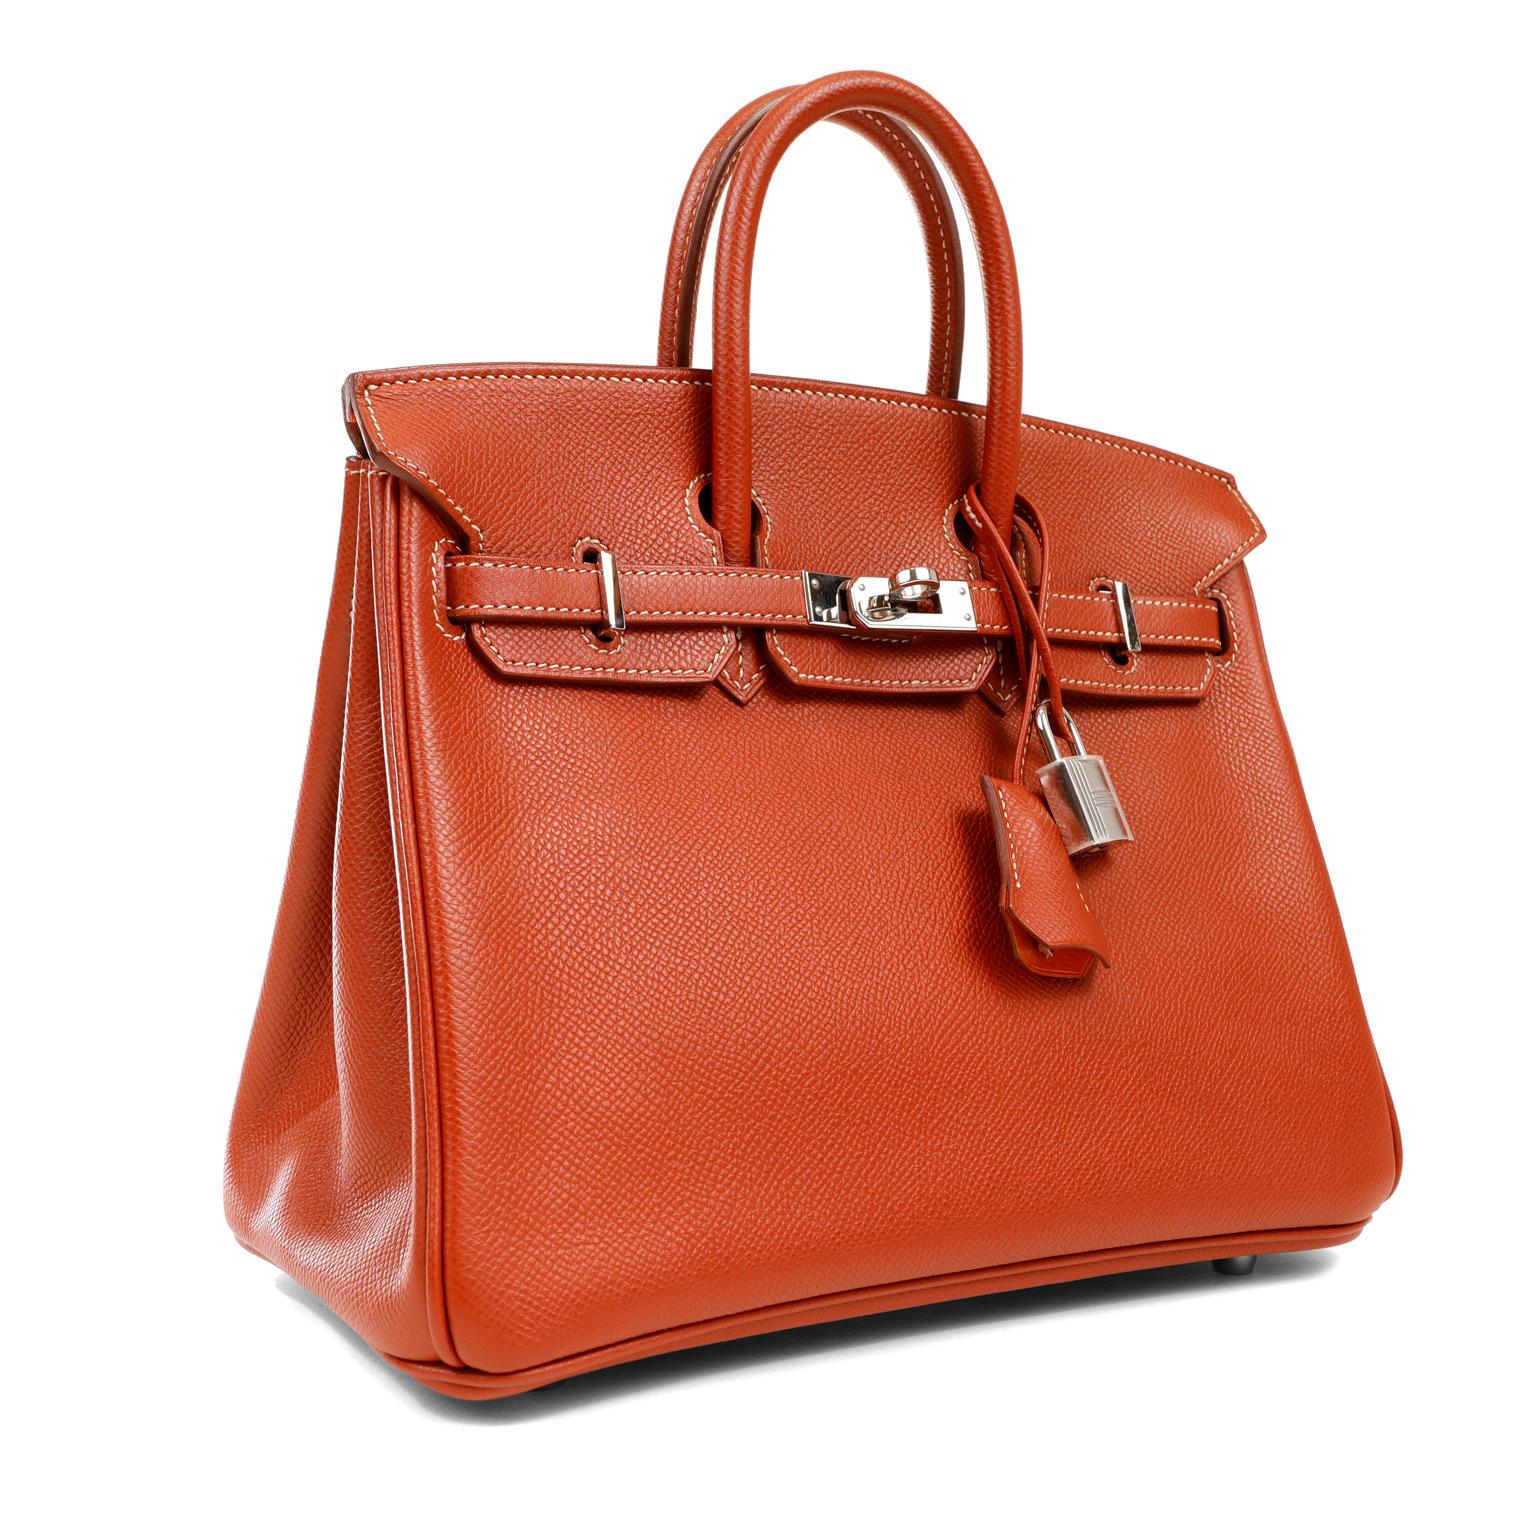 This authentic Hermès Rust Epsom 25 cm Birkin is in excellent condition.  Considered the ultimate luxury item, the Hermès Birkin is stitched by hand. Waitlists are commonplace and the 25 cm silhouette is in highest demand. 
Epsom leather is textured